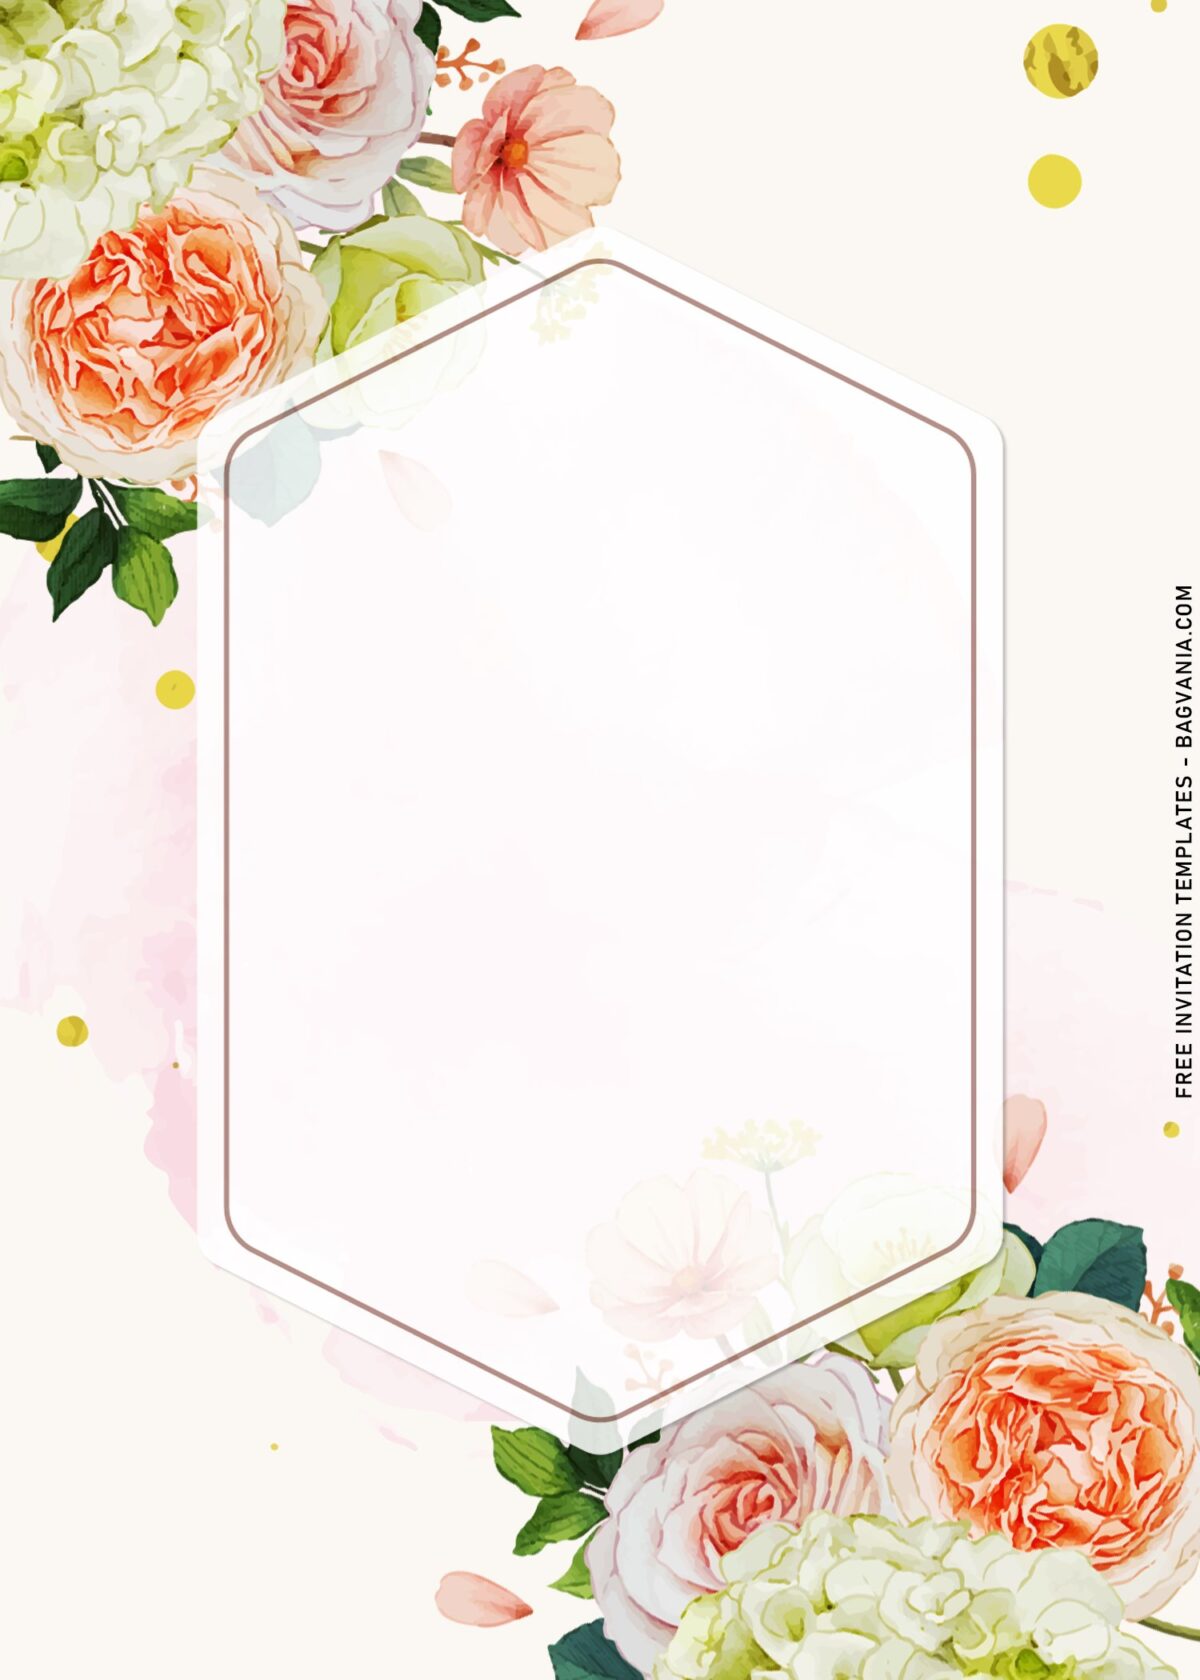 10+ Beautiful Blush And Peach Roses Birthday Invitation Templates with rustic paper background